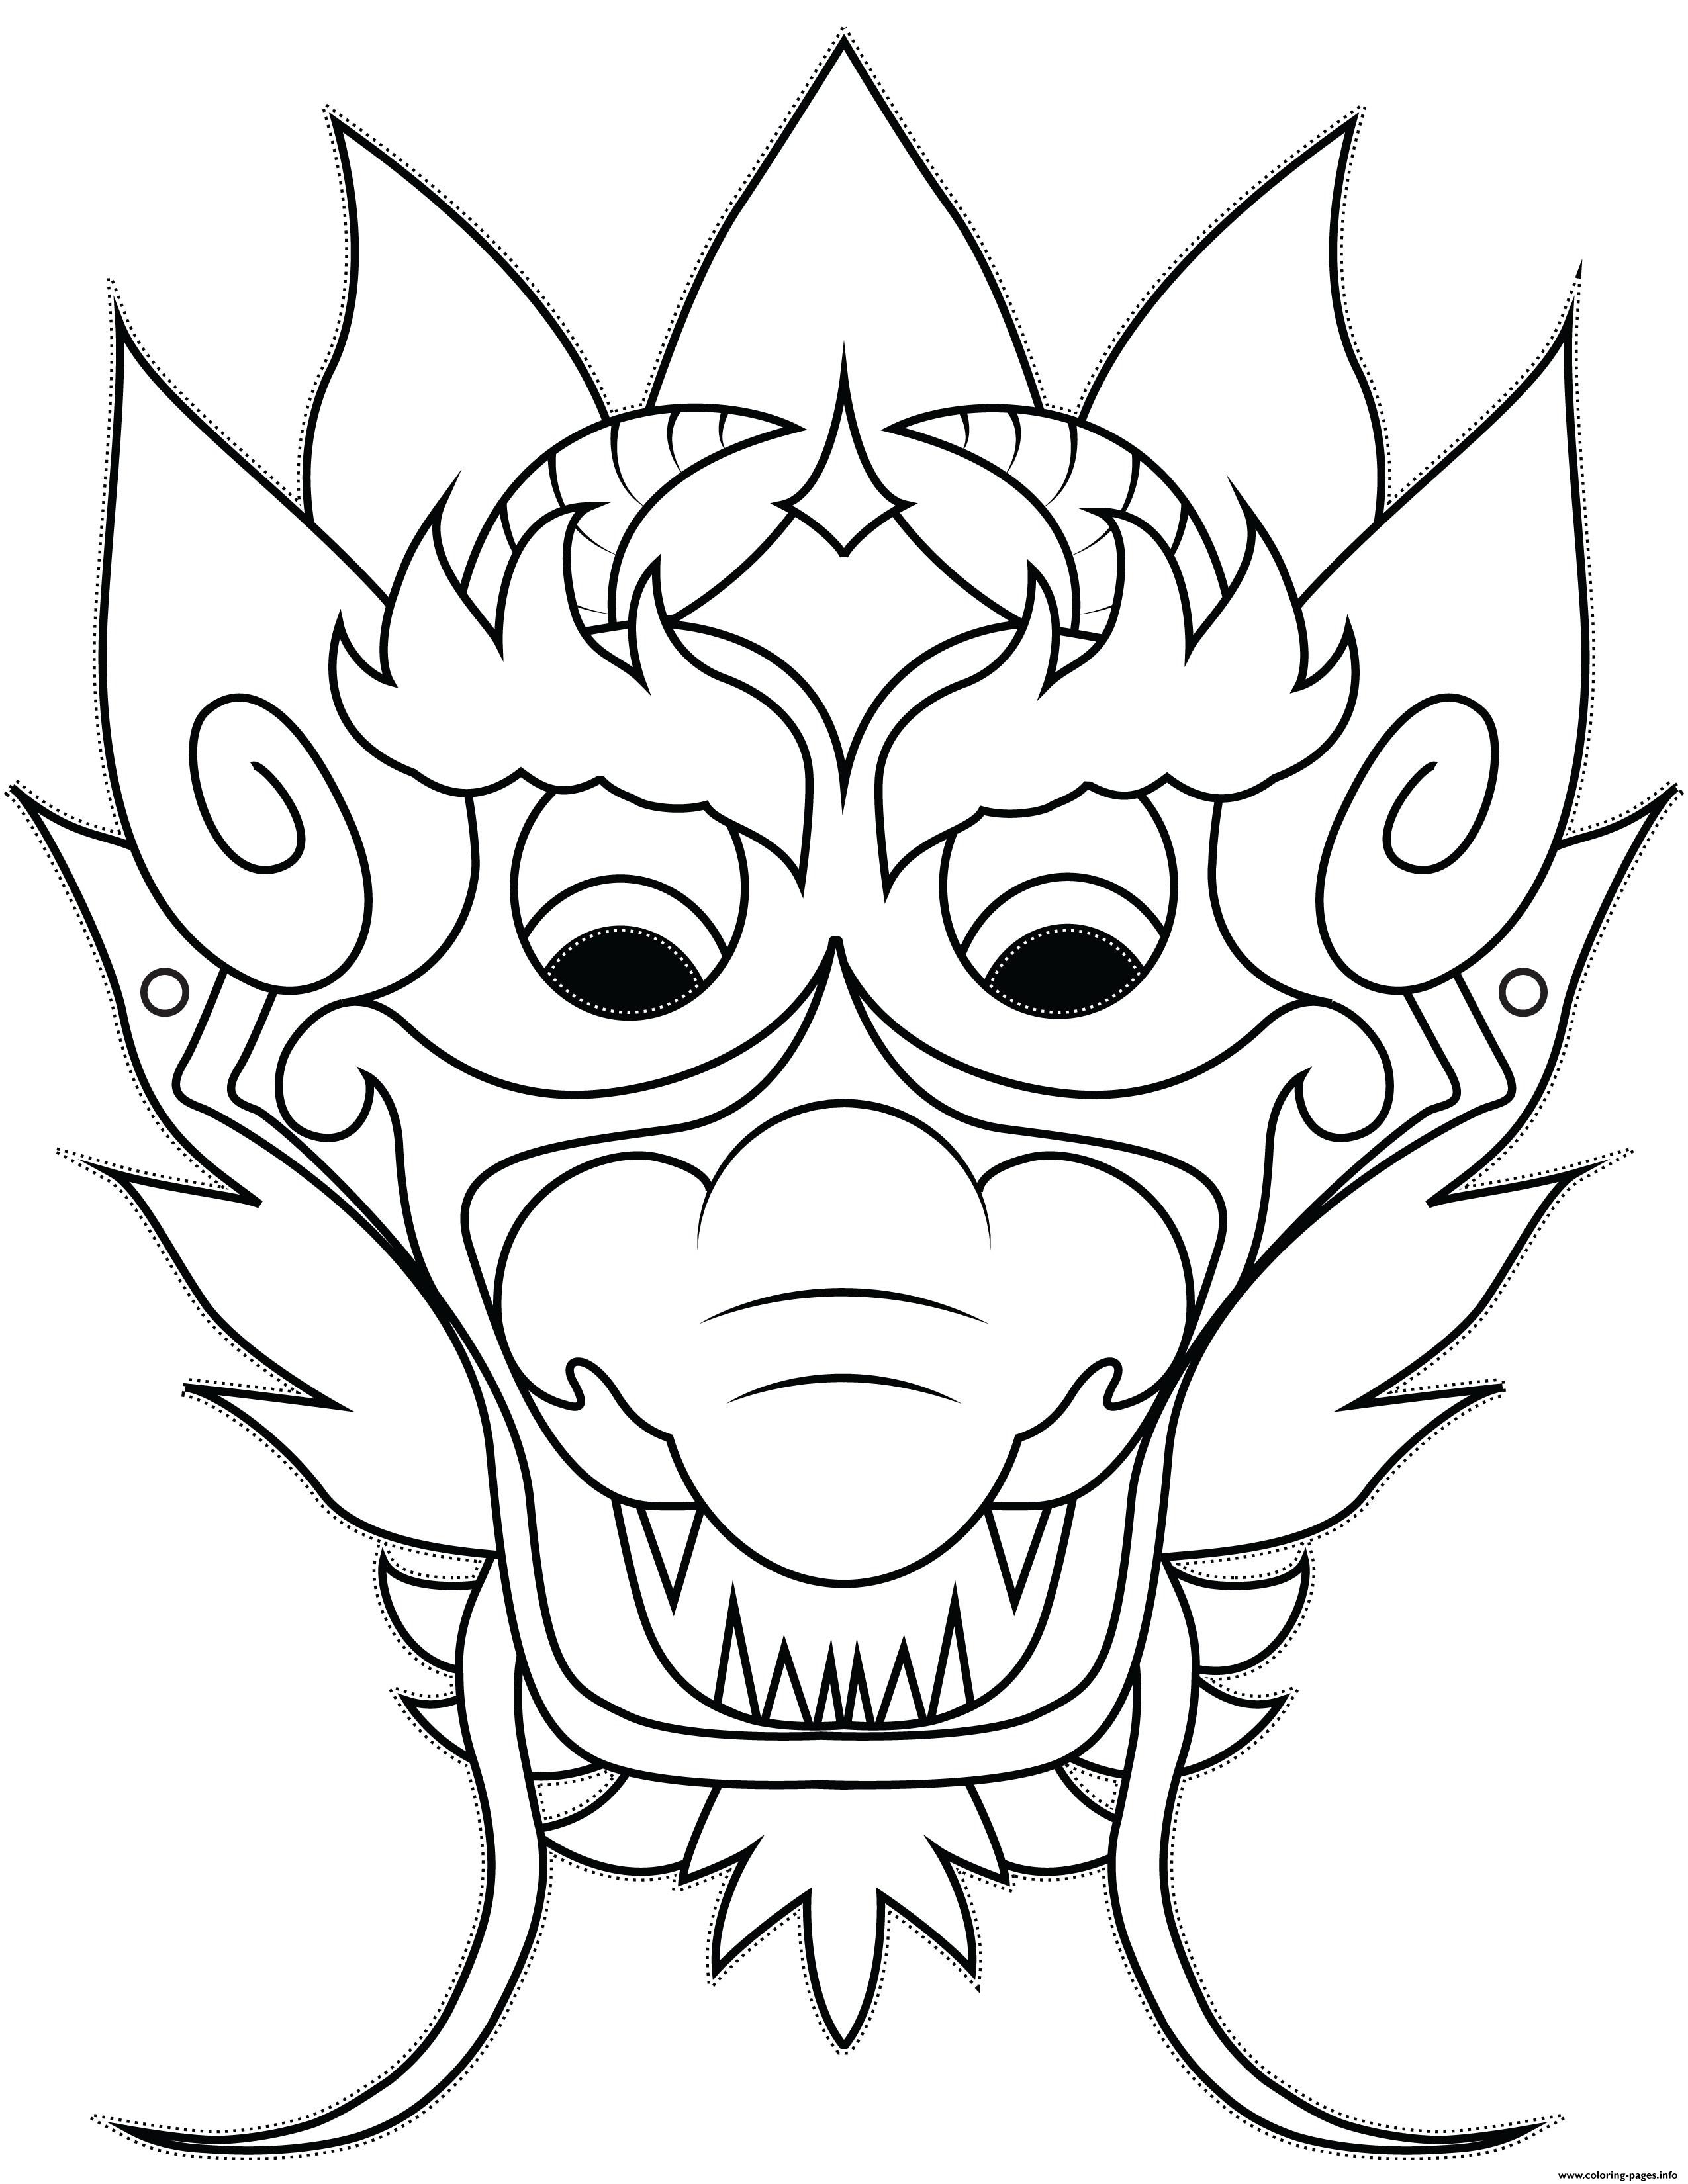 2018 Chinese New Year Mask Dragon coloring